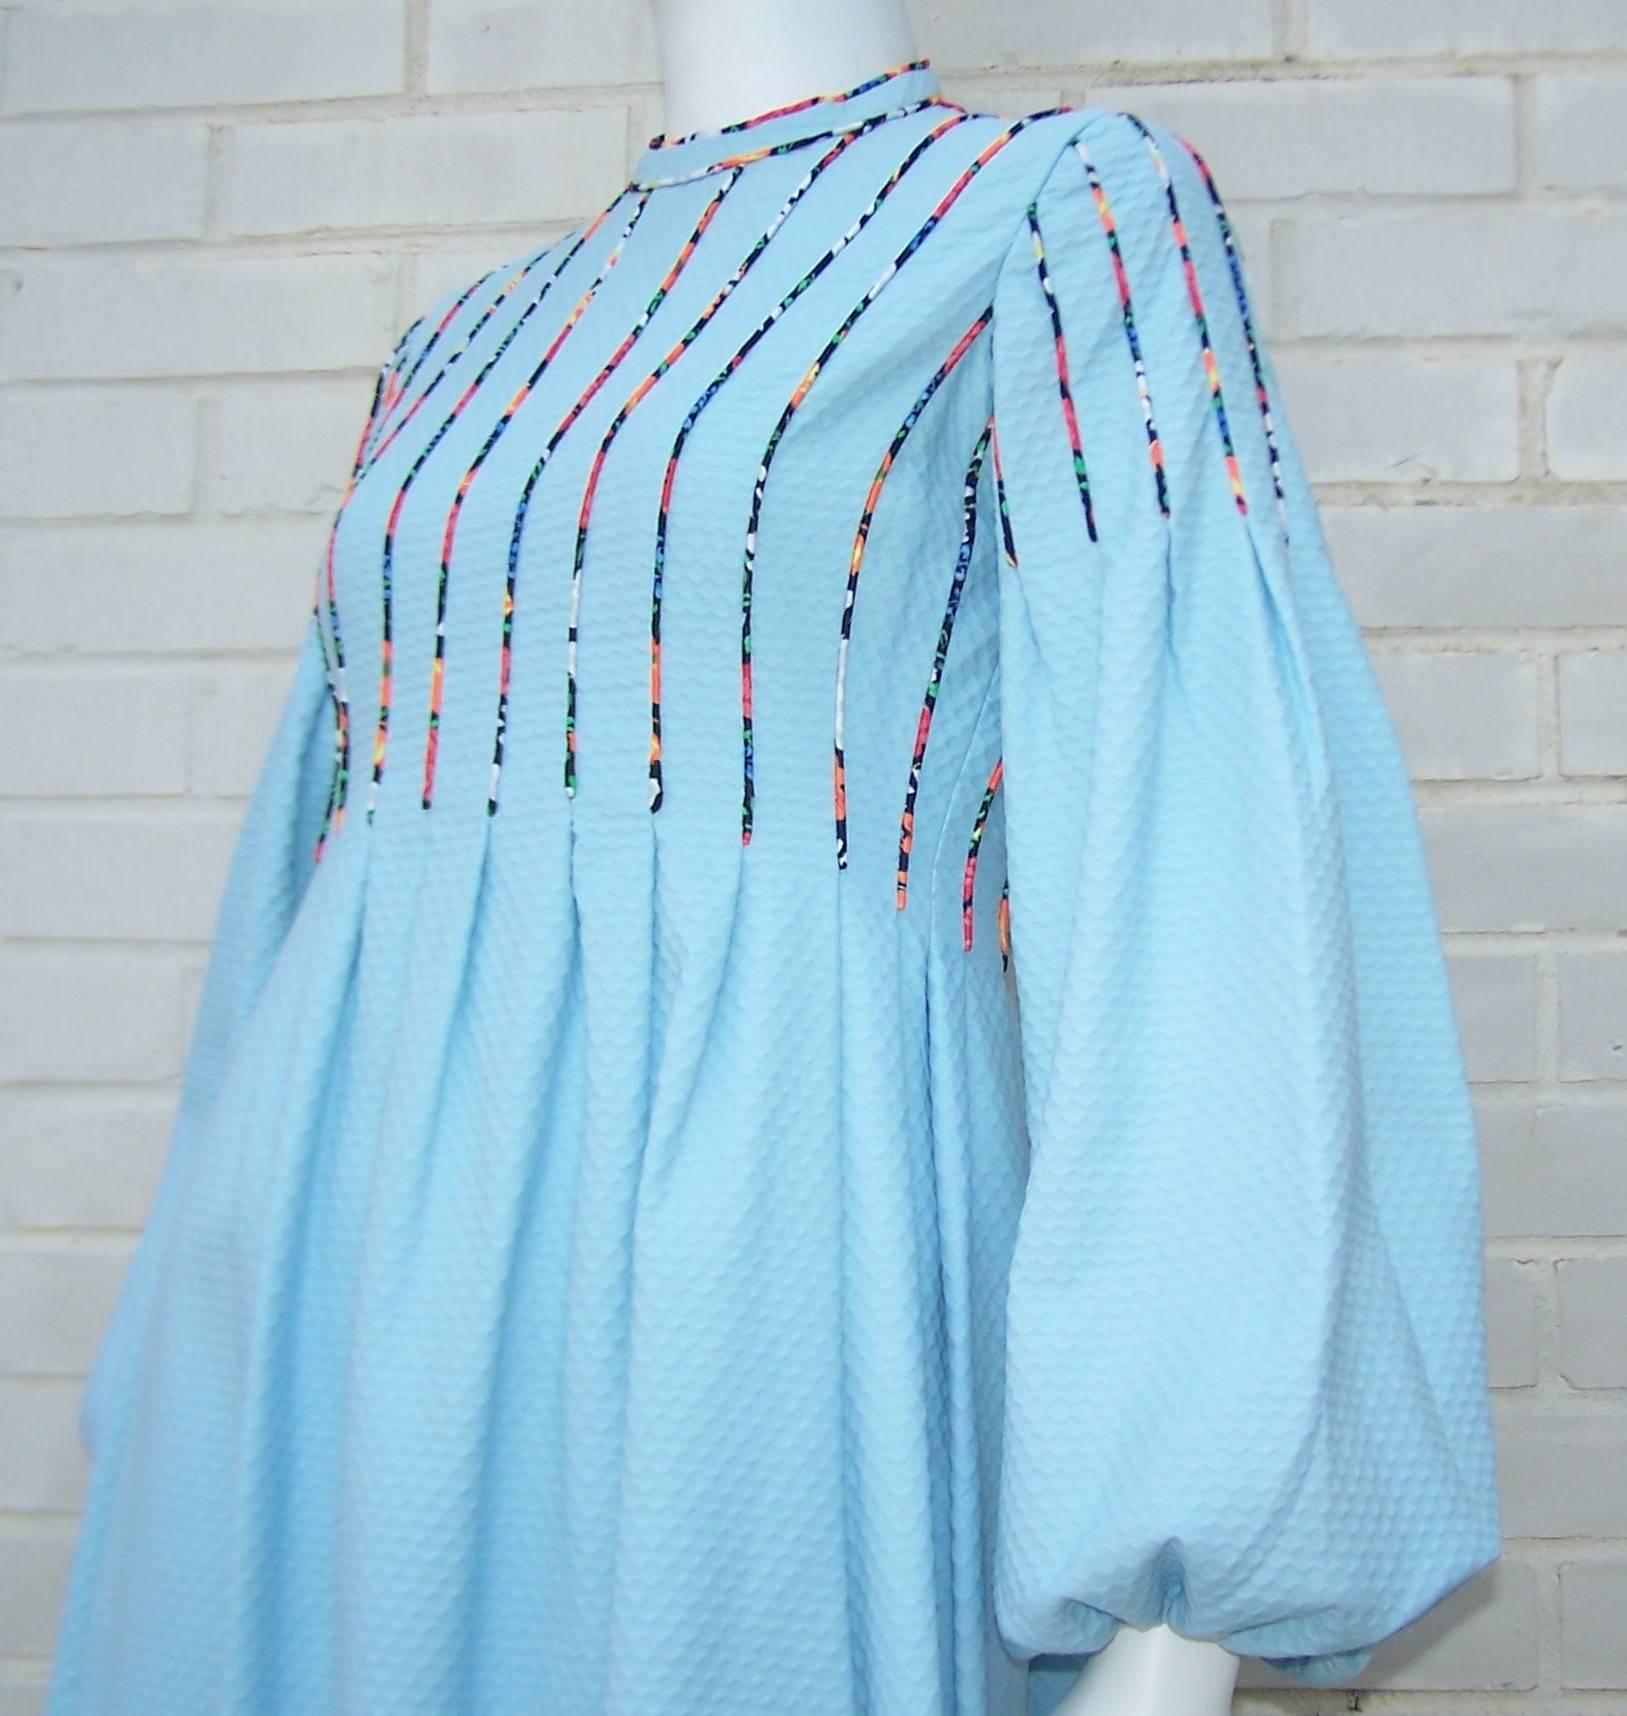 c.1970 Rizkallah for Malcolm Starr Cotton Pique Dress With Poet Sleeves  1